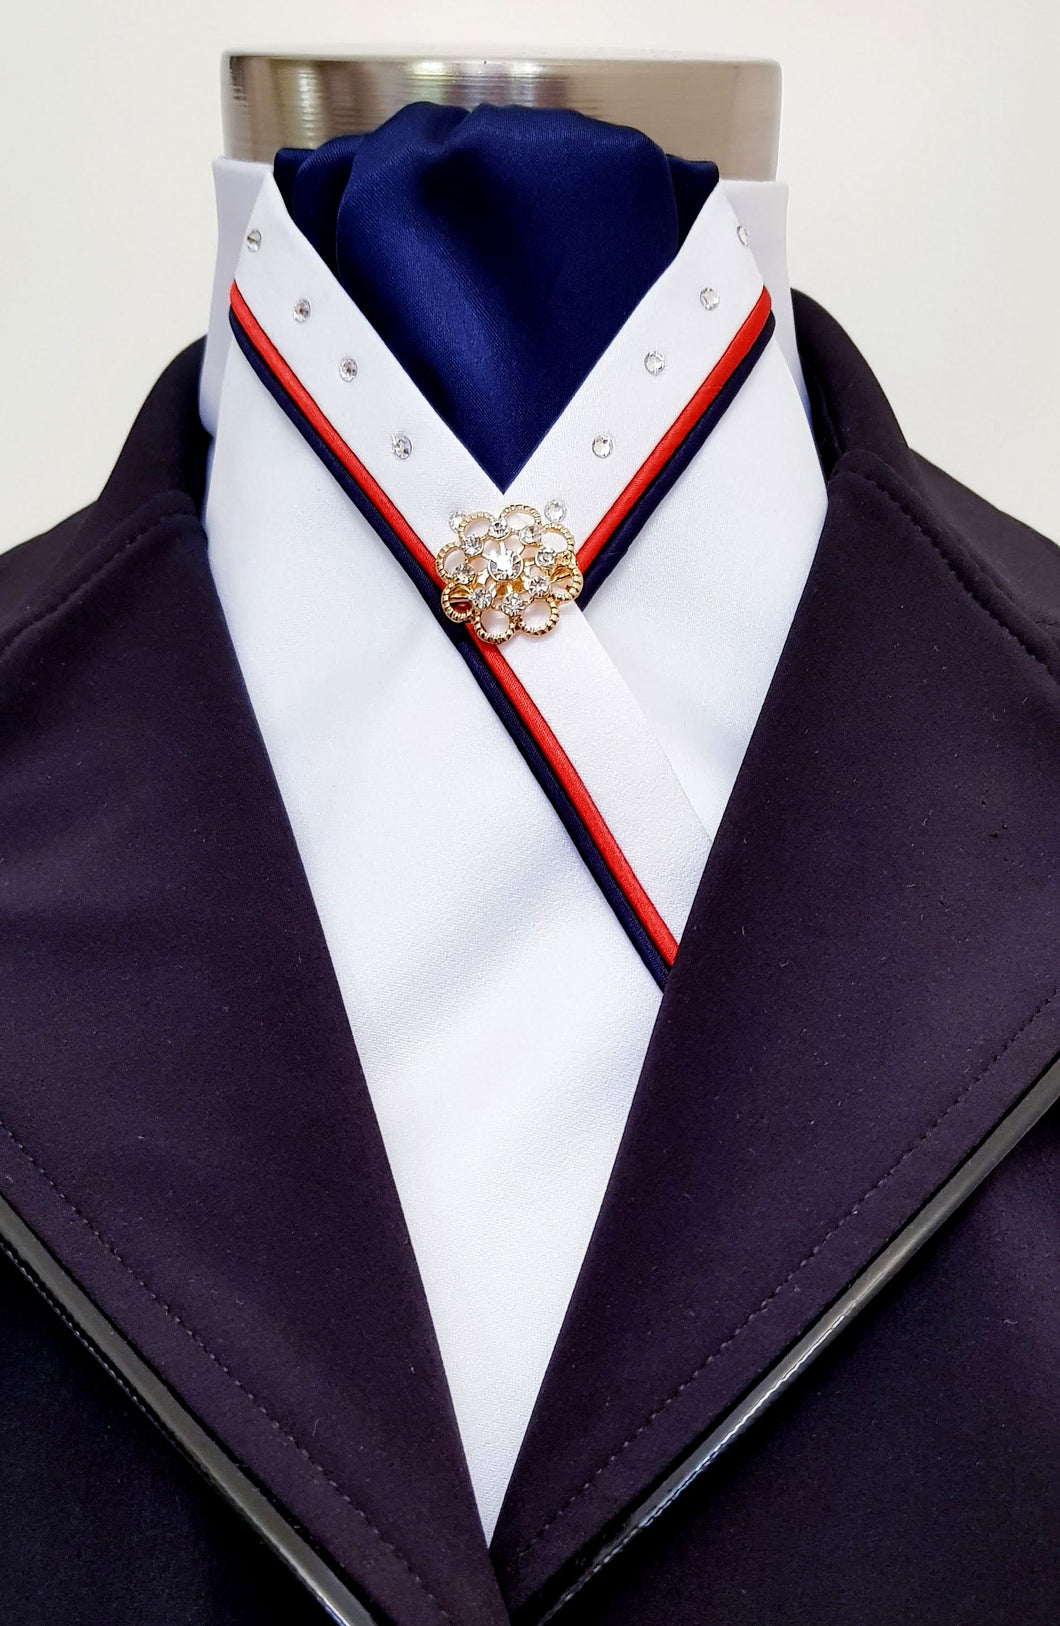 ERA SOPHIE STOCKTIE - White & navy with red & navy piping, Swarovski crystals and brooch